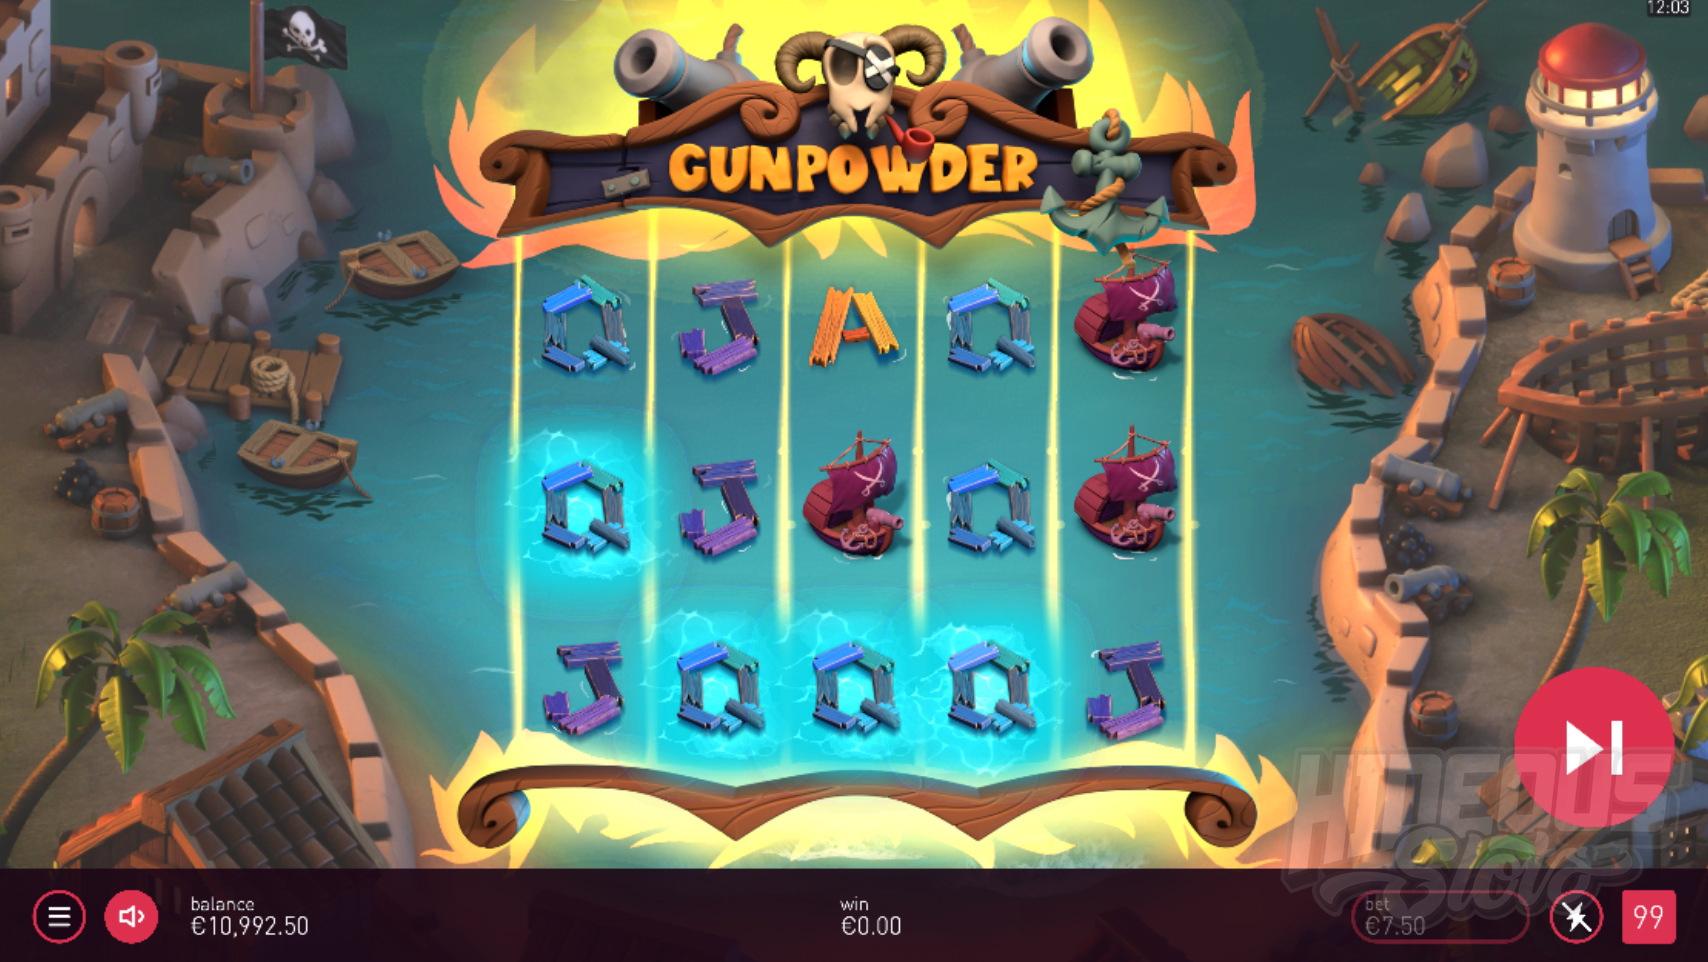 Gunpowder Offers Players 10 Fixed Win Lines